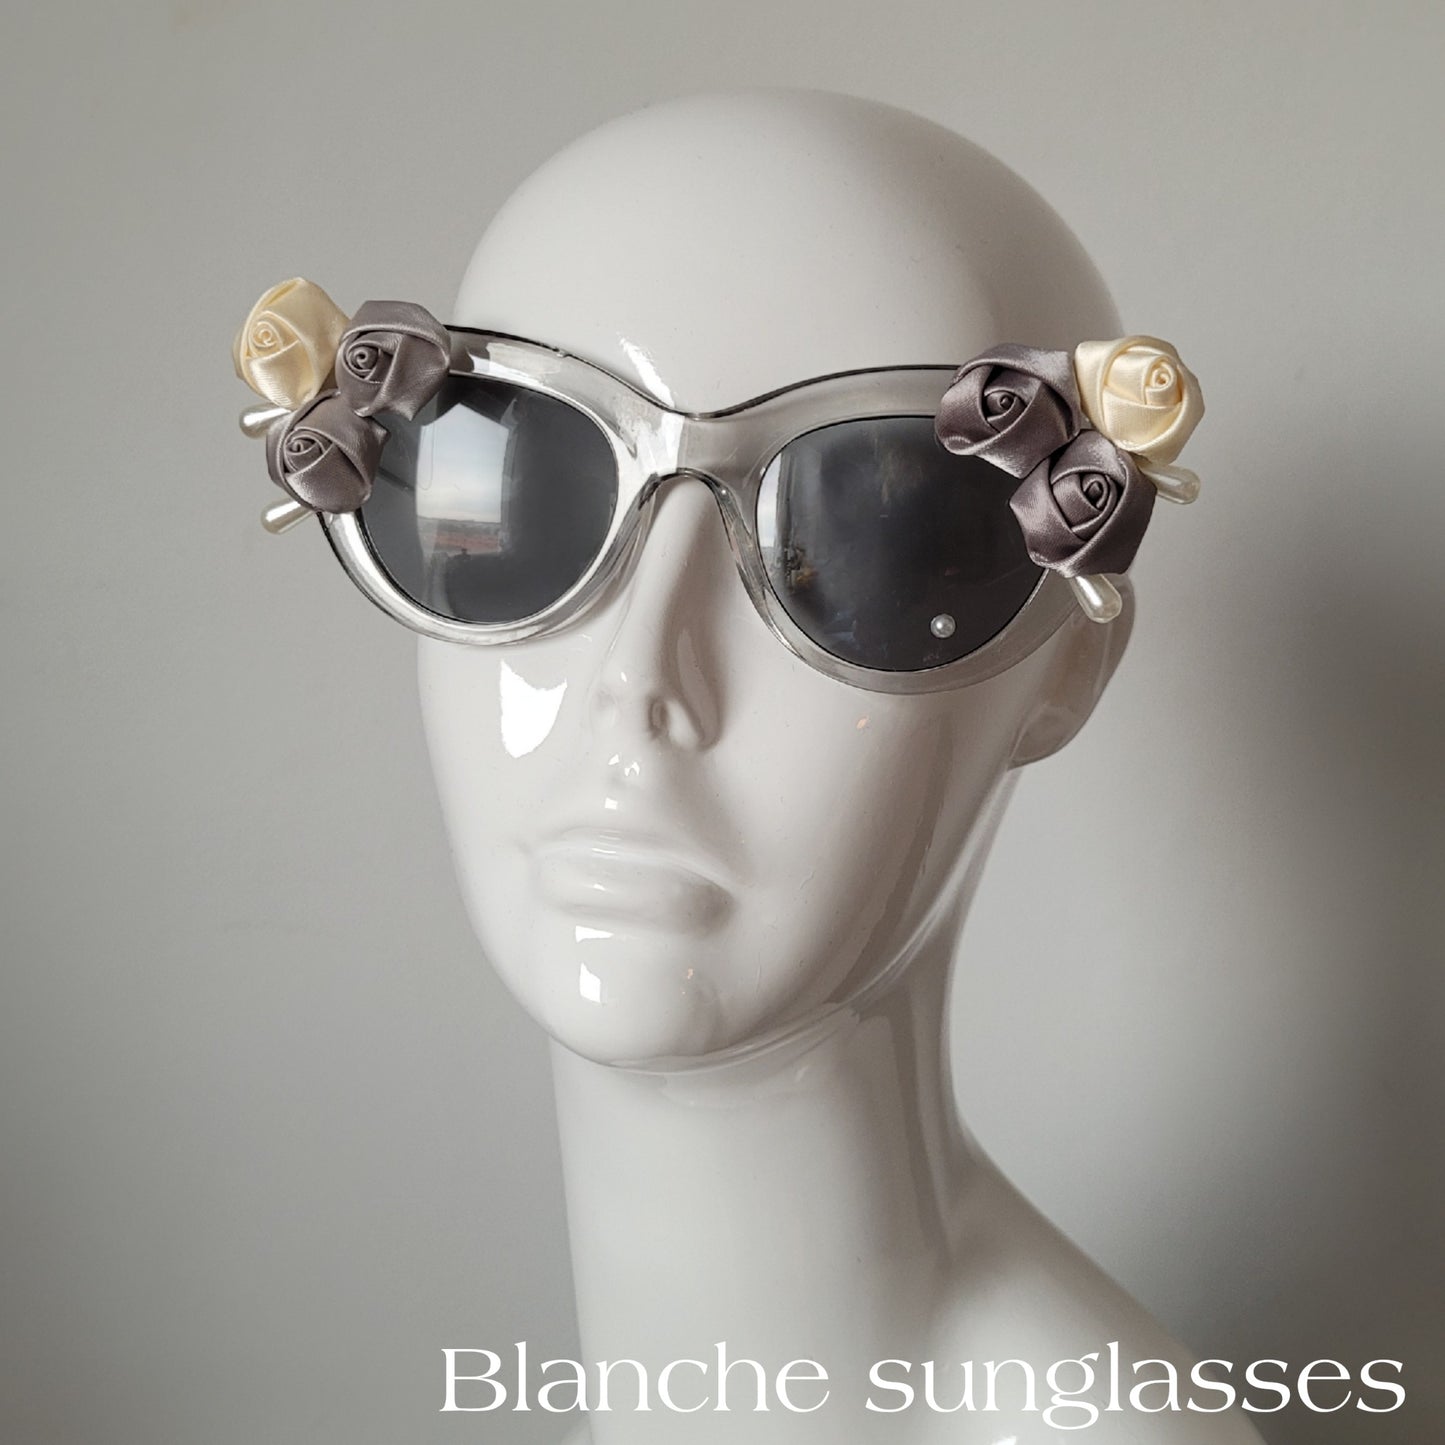 Á vallians coeurs riens impossible Collection: The Blanche sunglasses